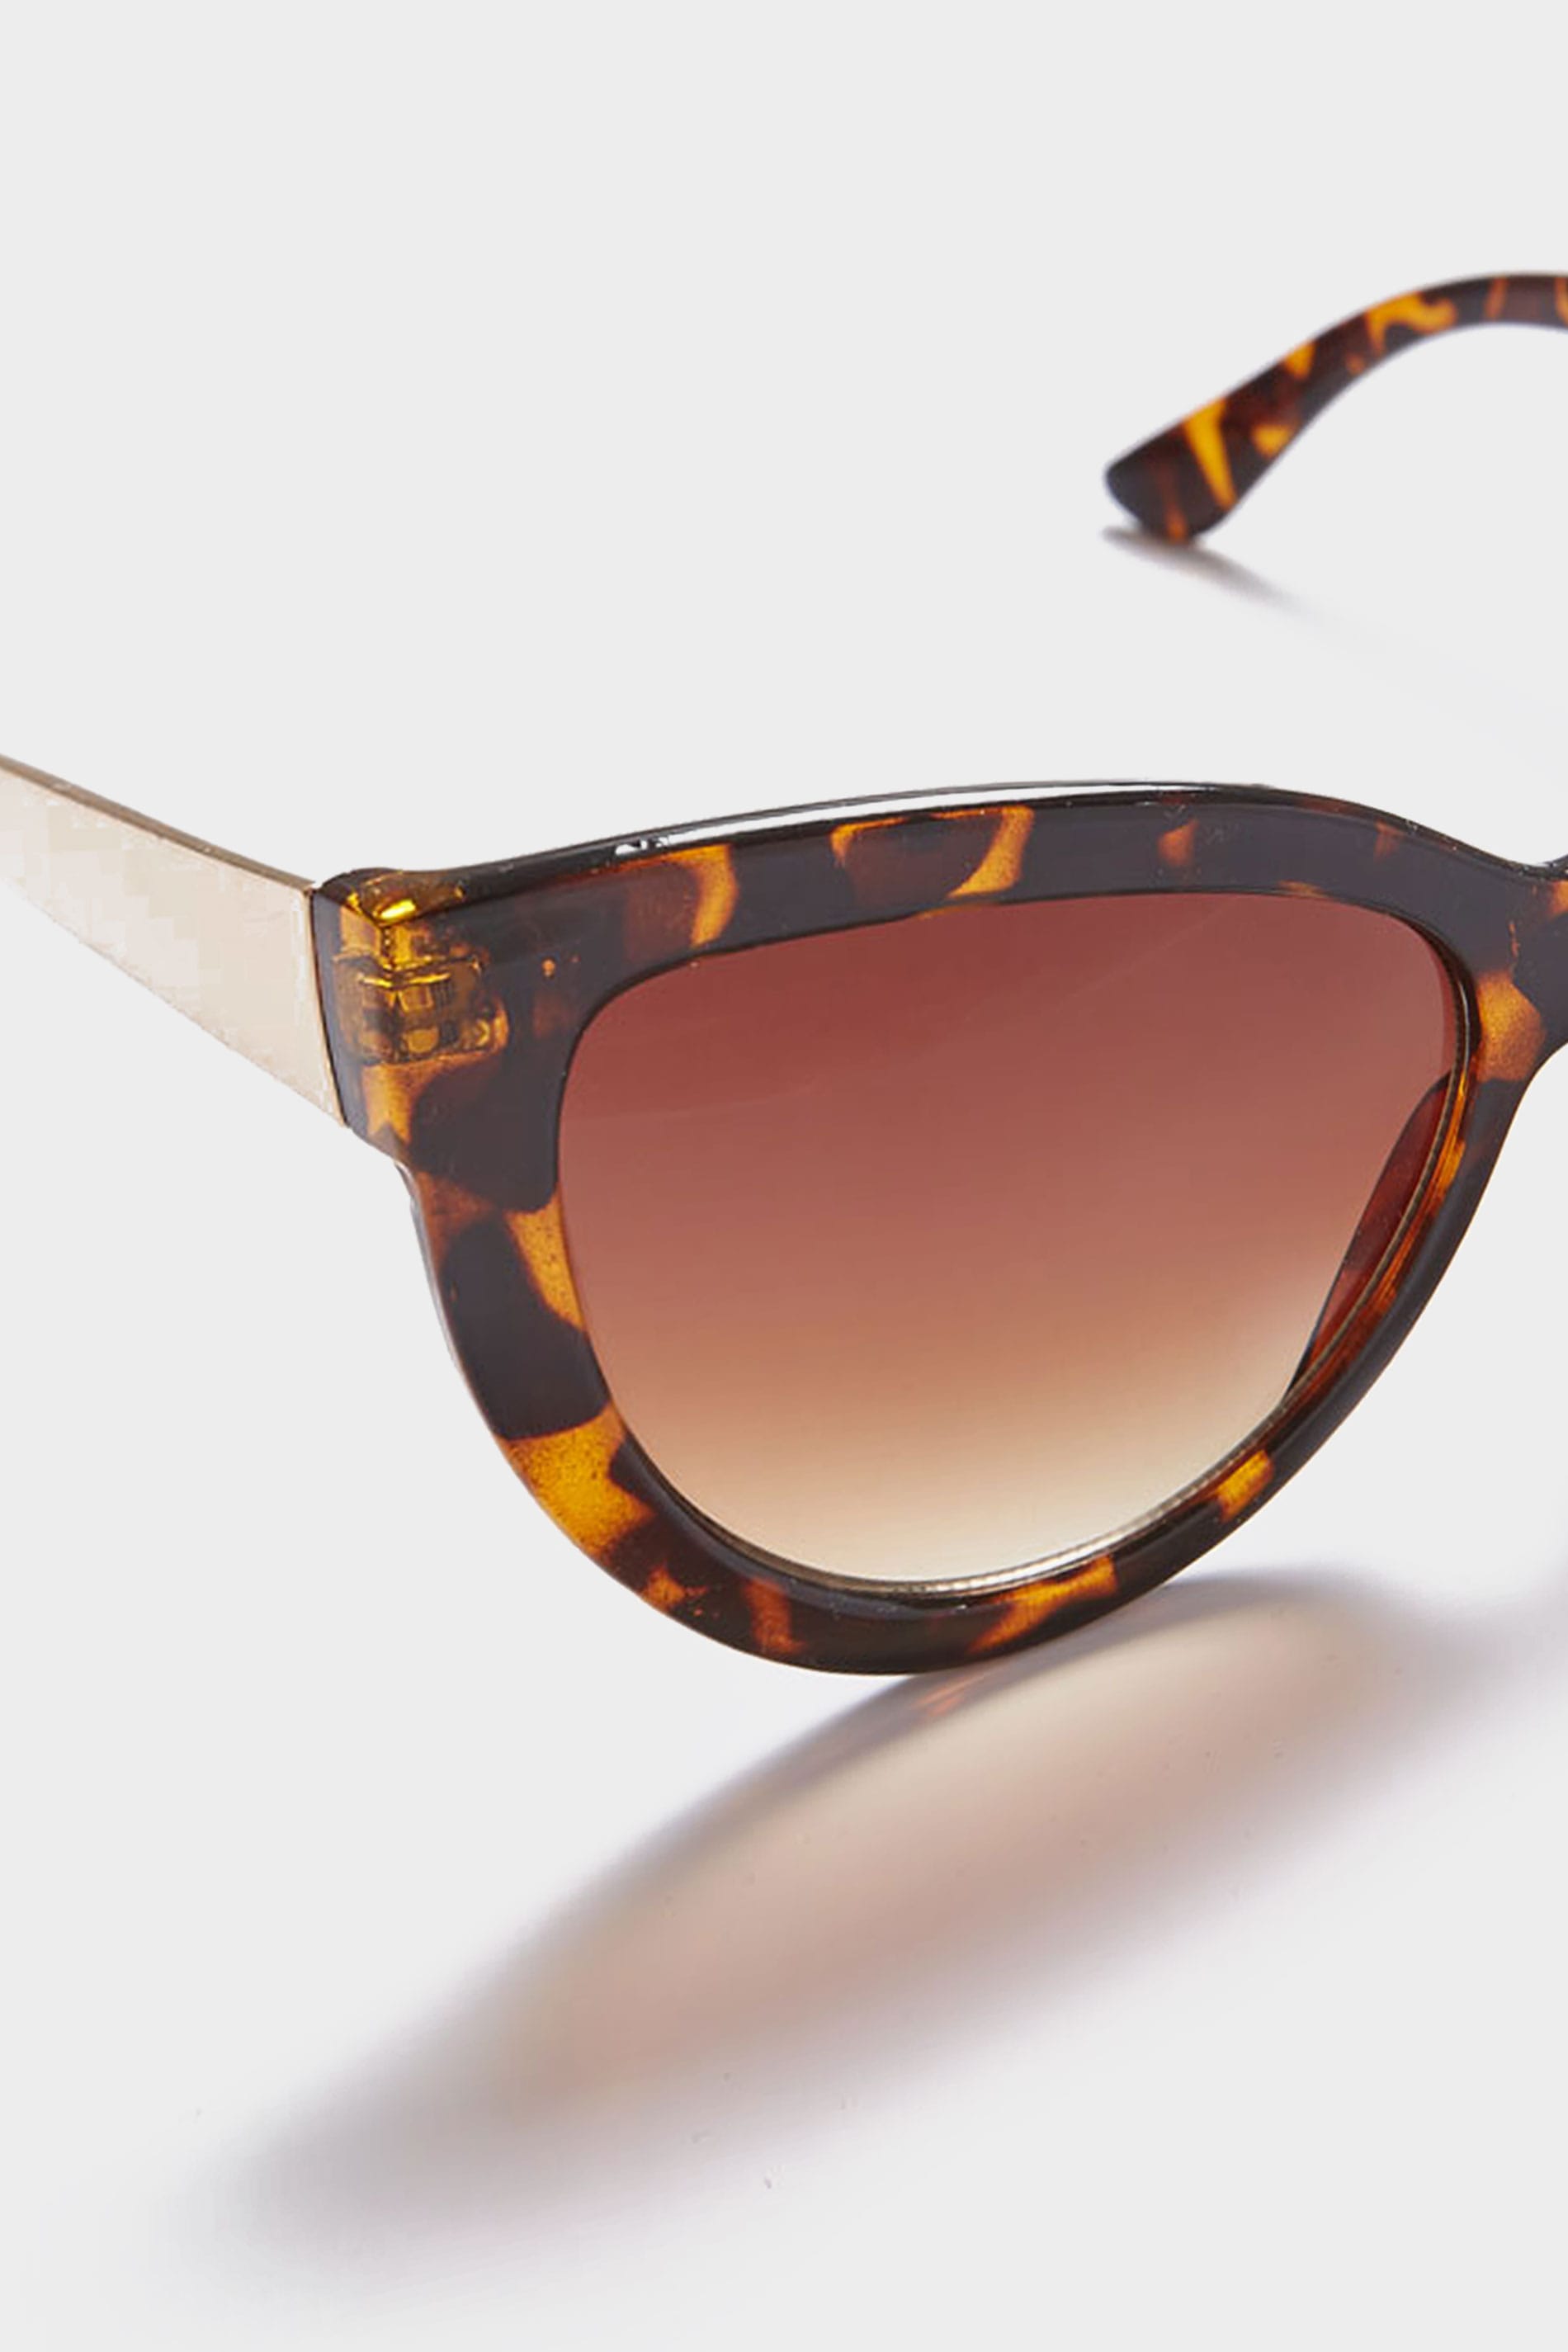 Tortoiseshell Cat Eye Sunglasses With Gold Tone Arms And With Uv 400 Protection